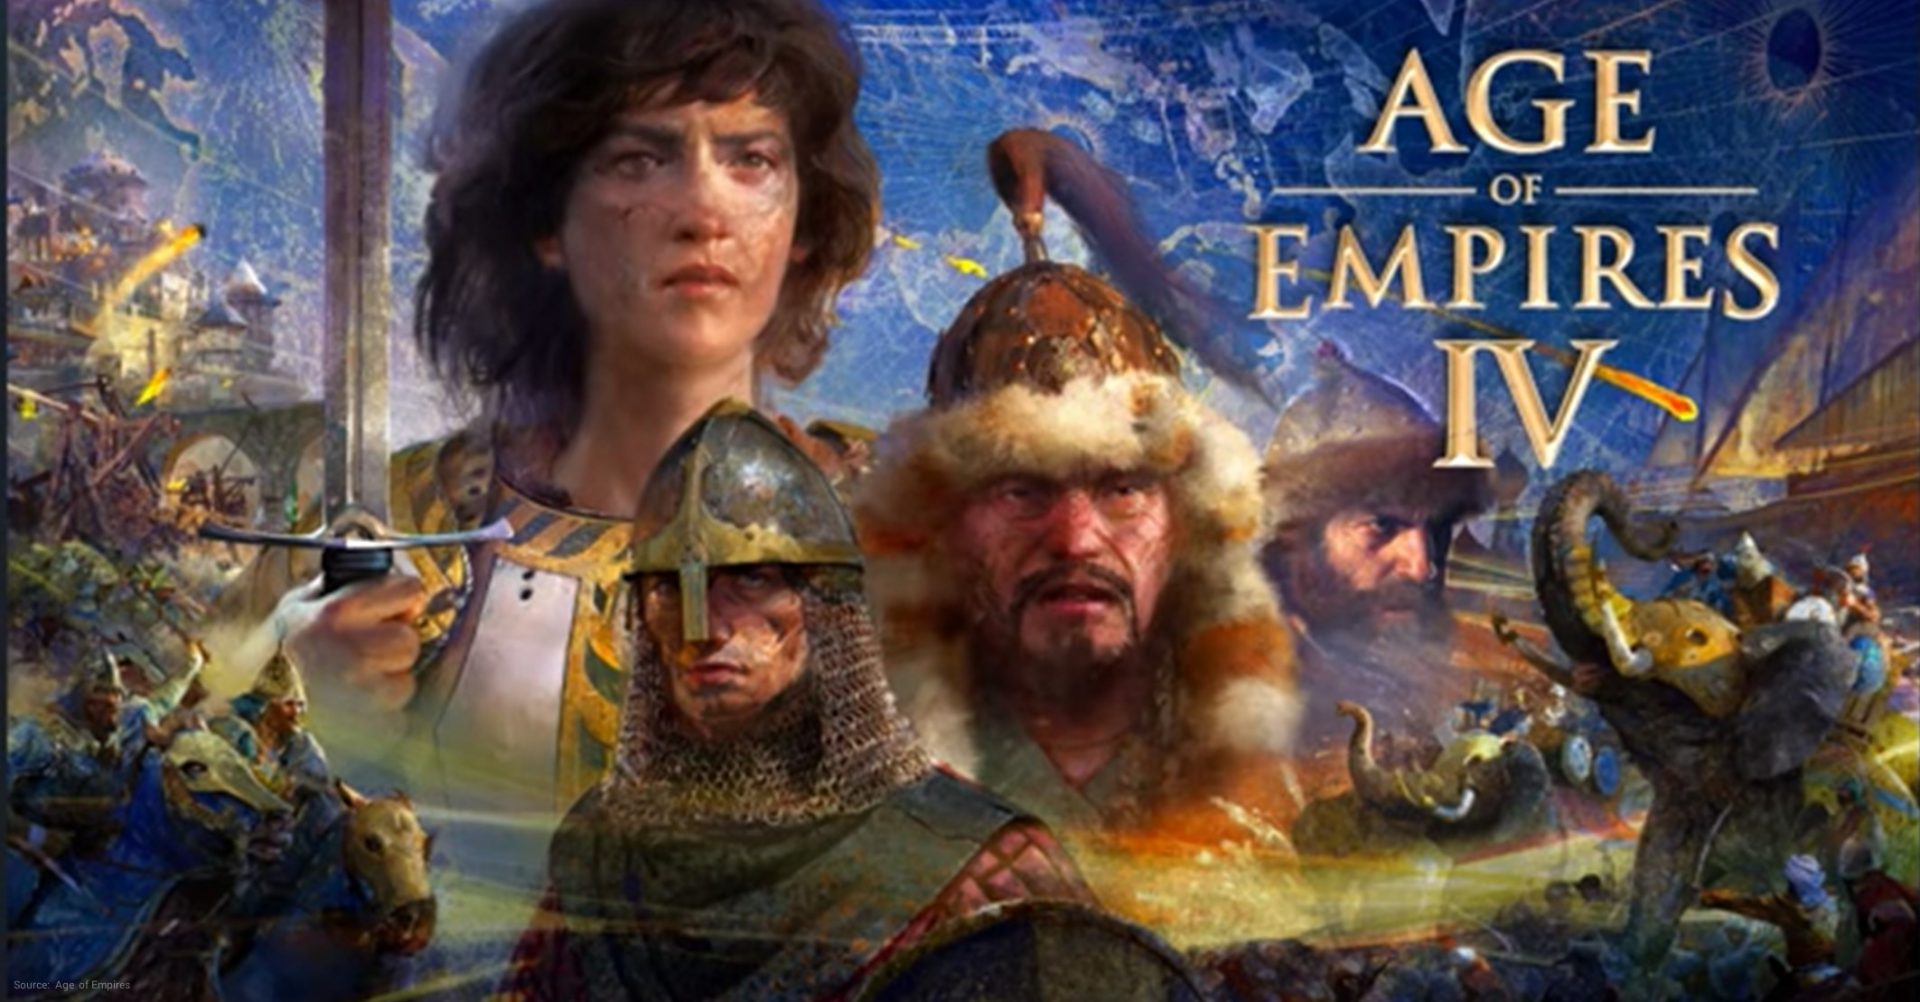 Review: Age of Empires 4 – Focused Campaigns and Documentary-style Cutscenes